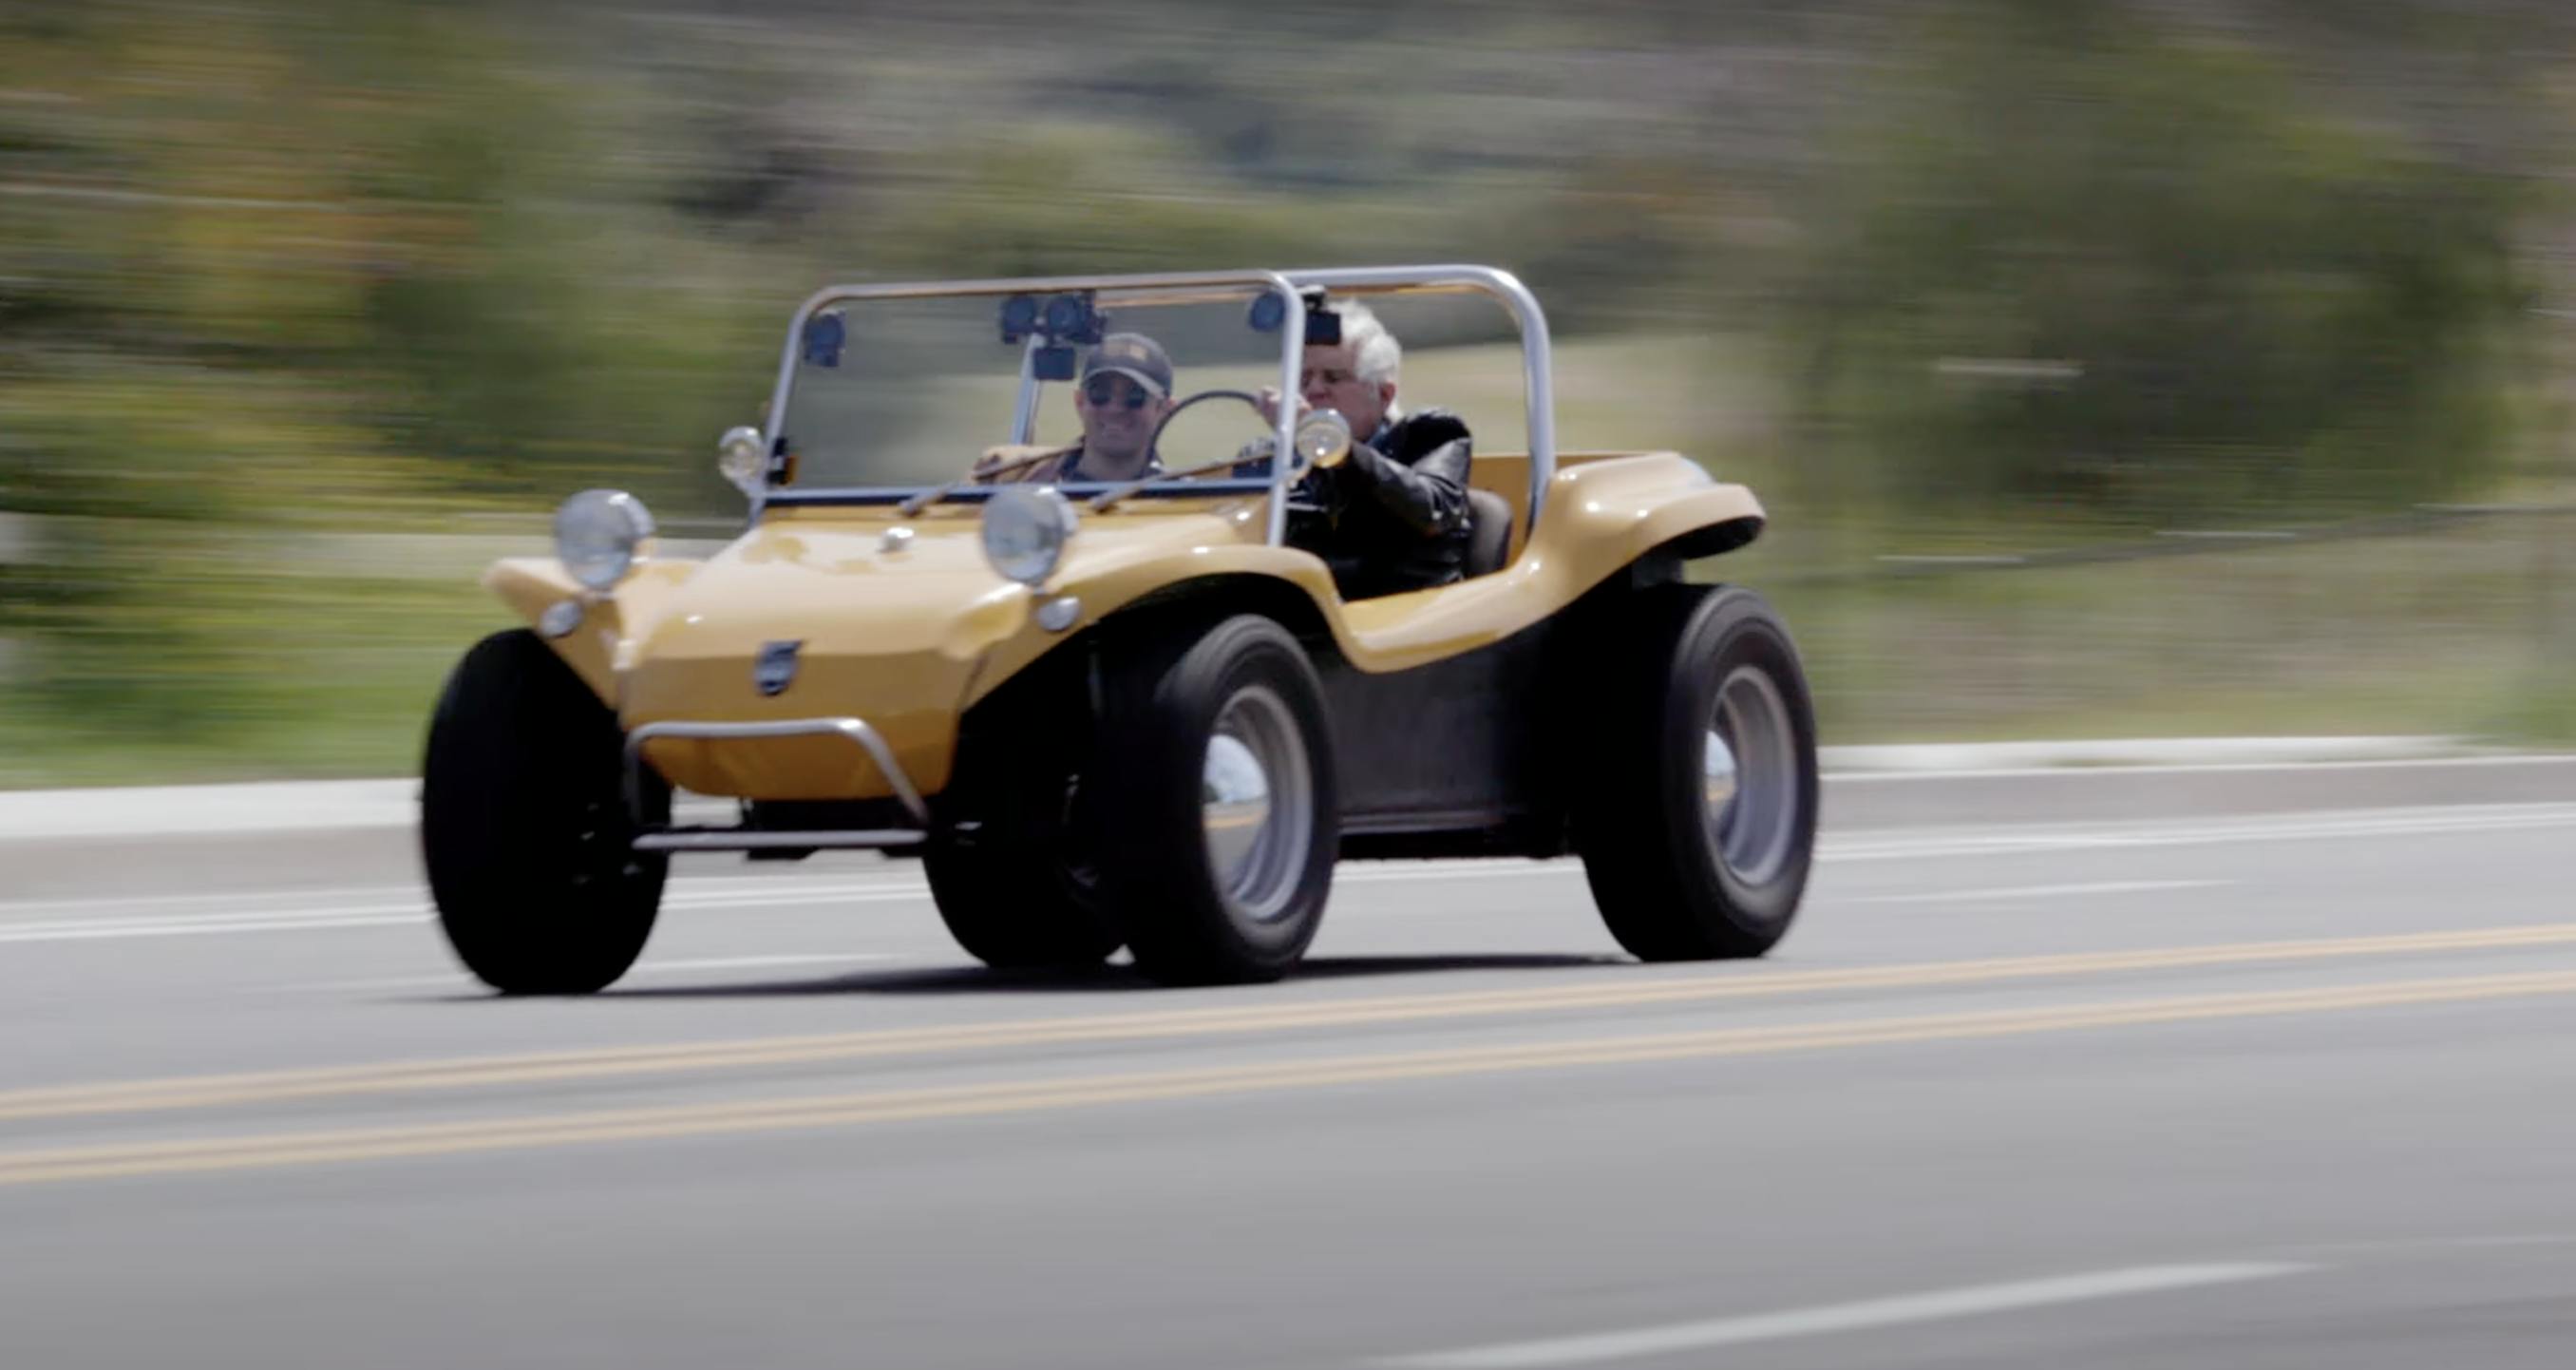 This Meyers Manx Packs A Three-Cylinder Surprise - Hagerty Media